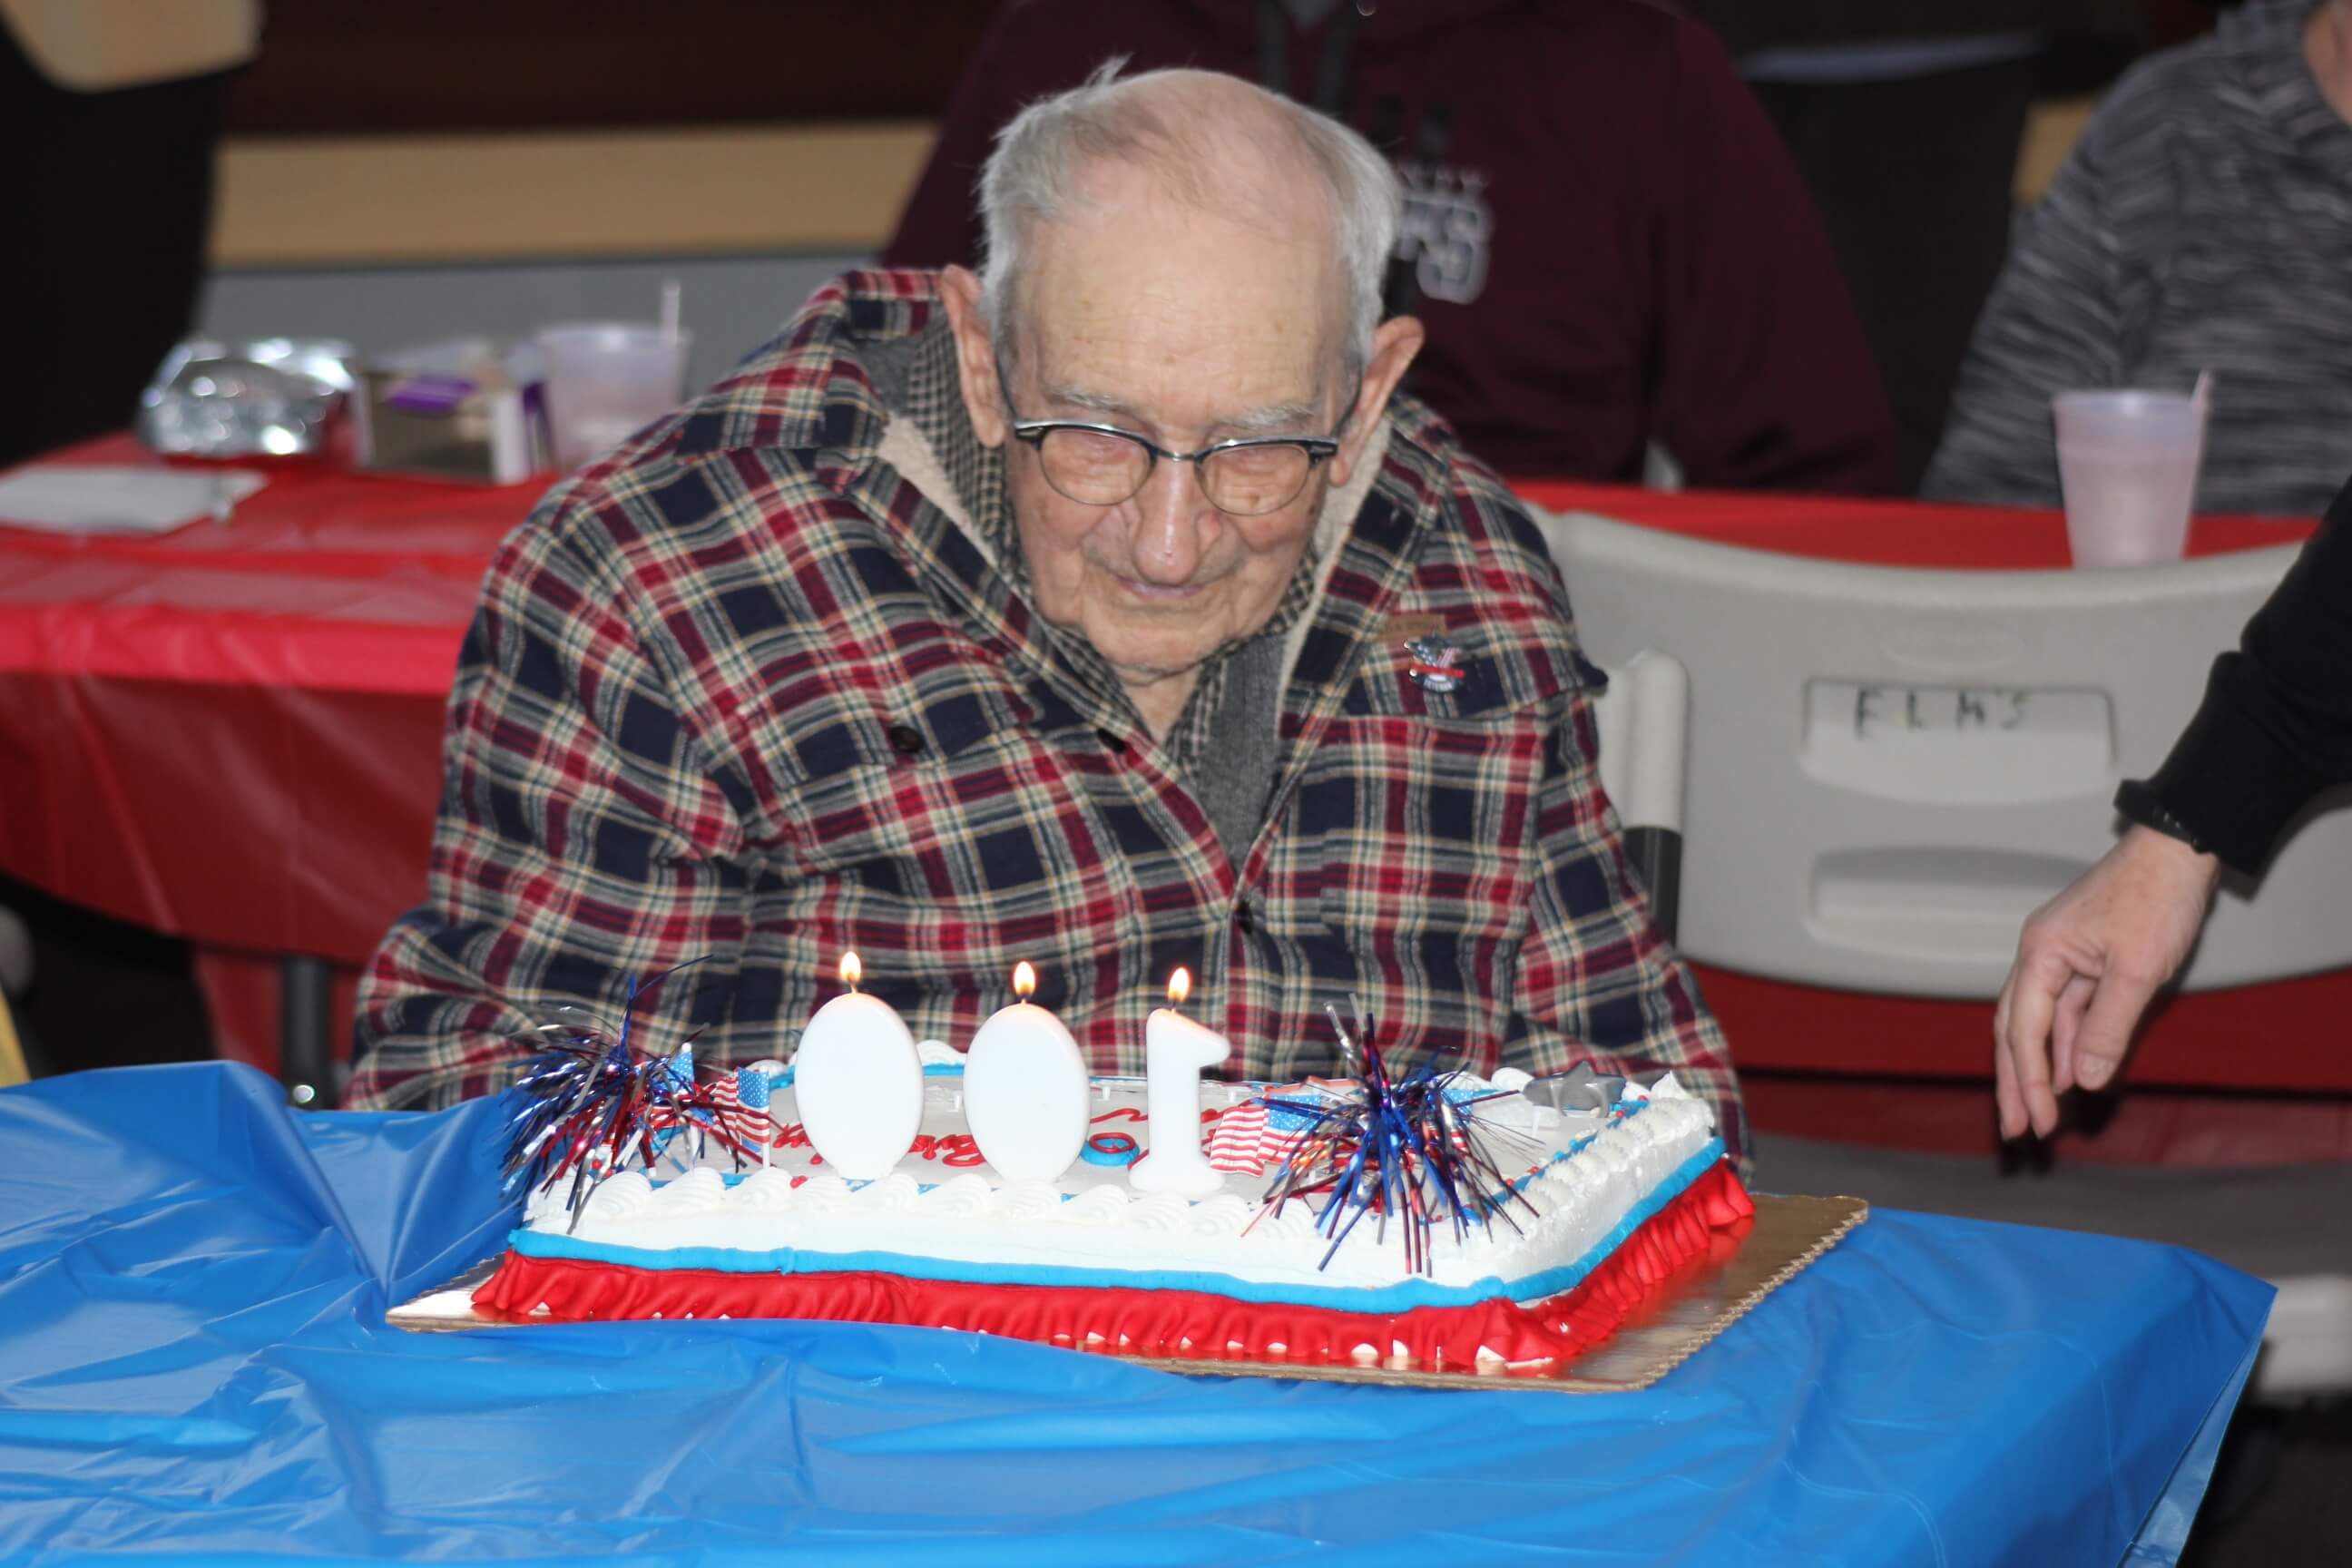 100-year-old World War II Army veteran James Neill prepares to blow out the candles on his birthday cake during a party held at the Greater Cape May Elks Lodge 2839 in Villas. Neill served in the Army Corps of Engineers in the Philippine Islands.